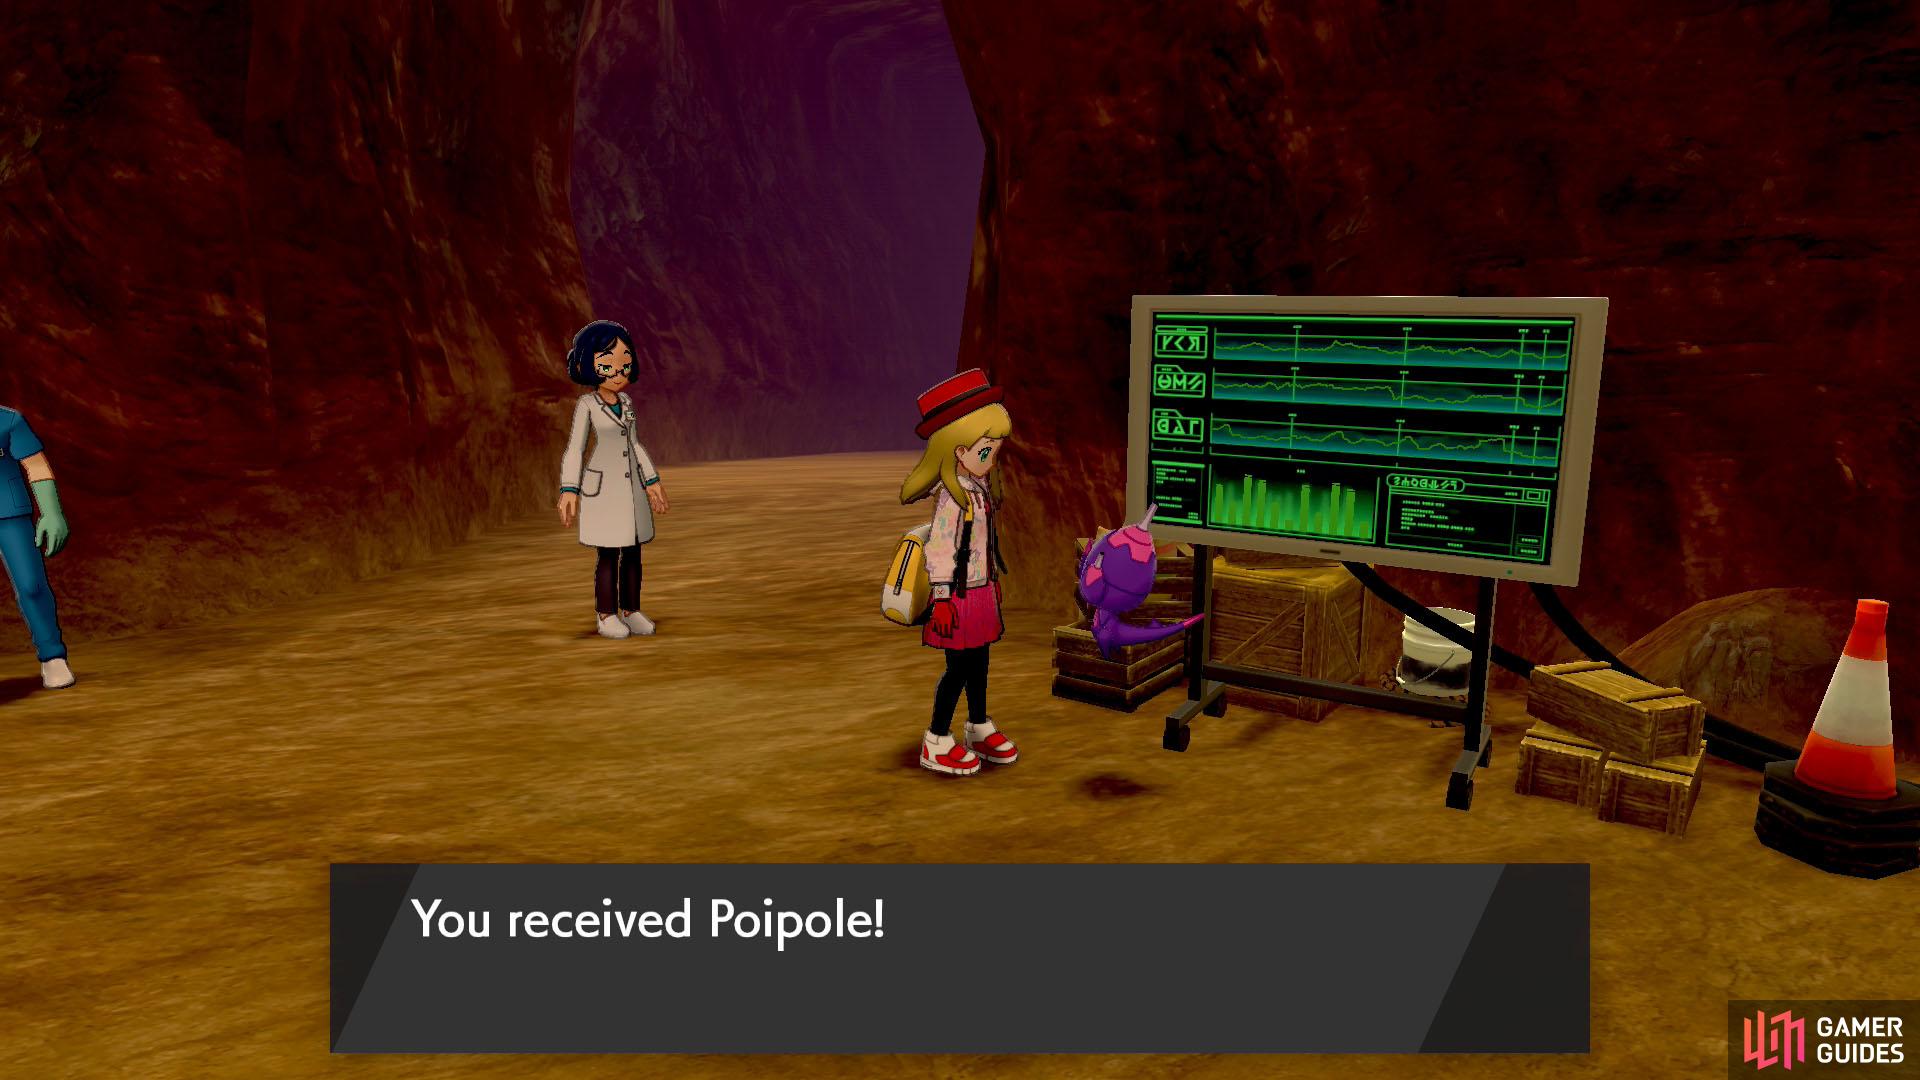 To evolve Poipole, it needs to learn Dragon Pulse. Speak to the Move Relearner (fella on the left) in any Pokémon Centre to do this.